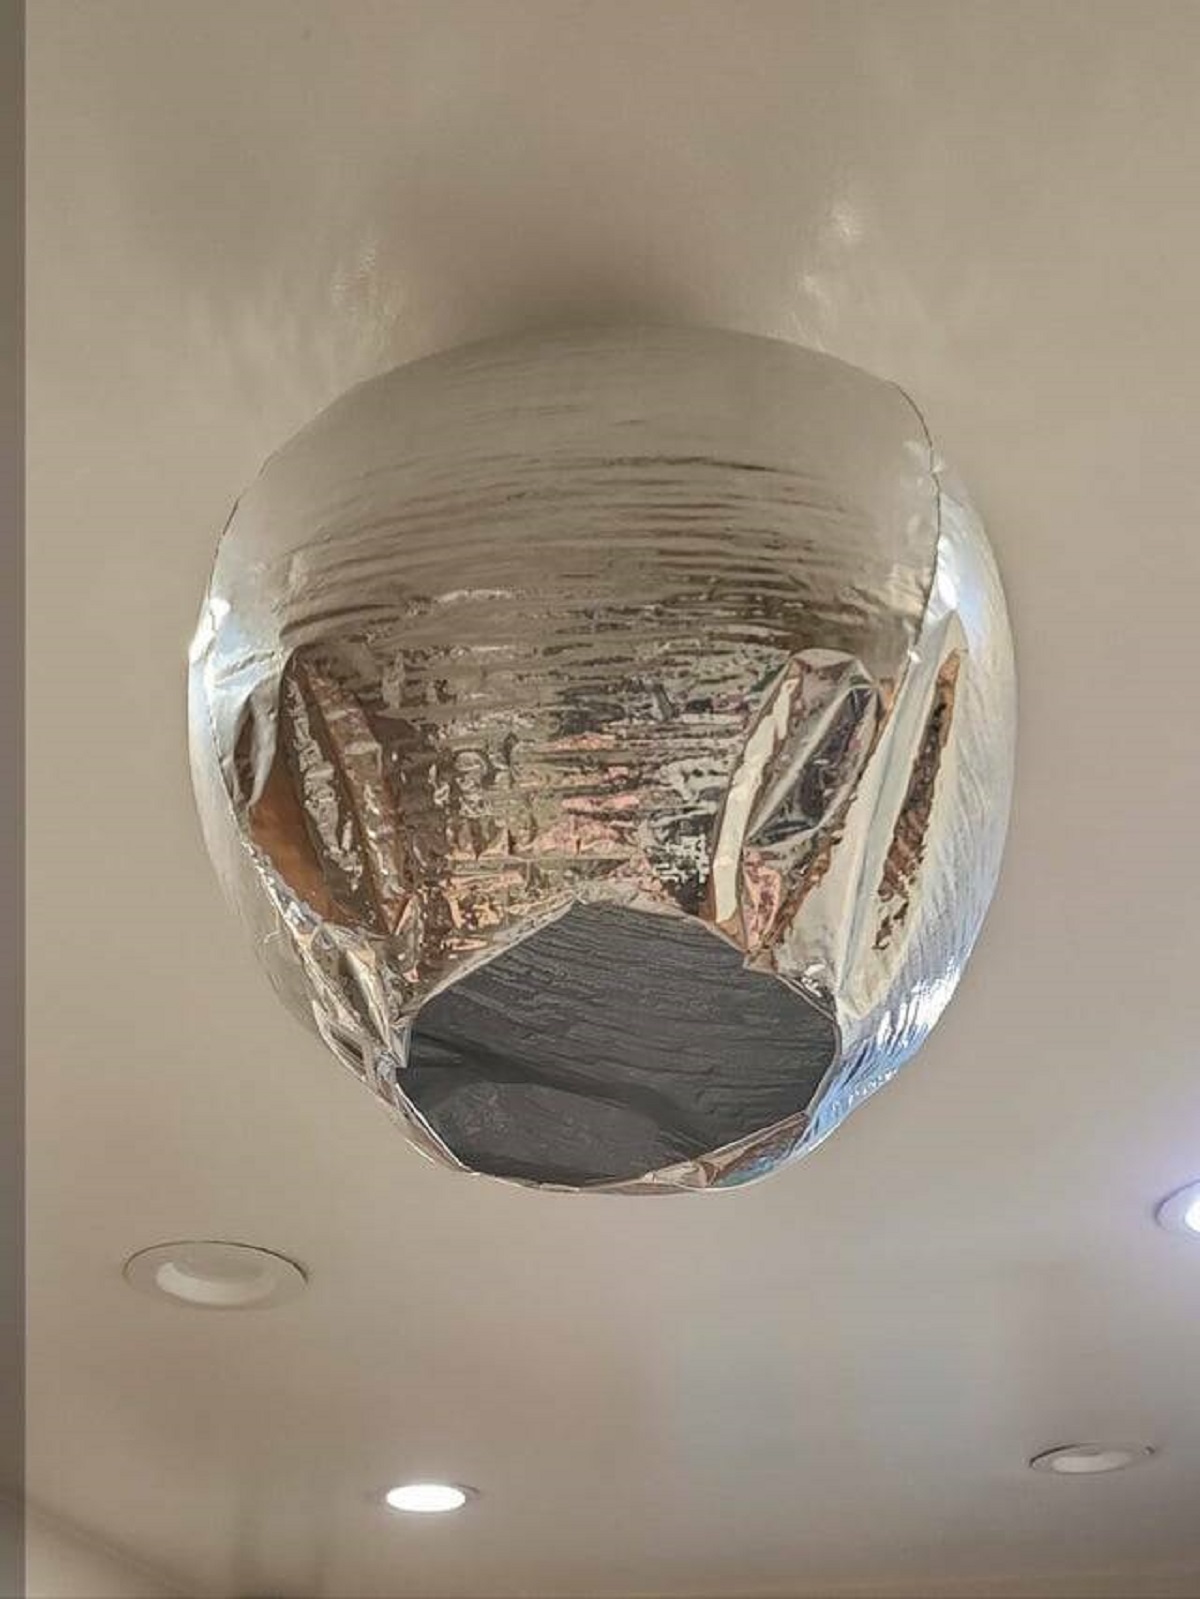 "A mylar balloon that is cut open, but is still holding helium and floating"